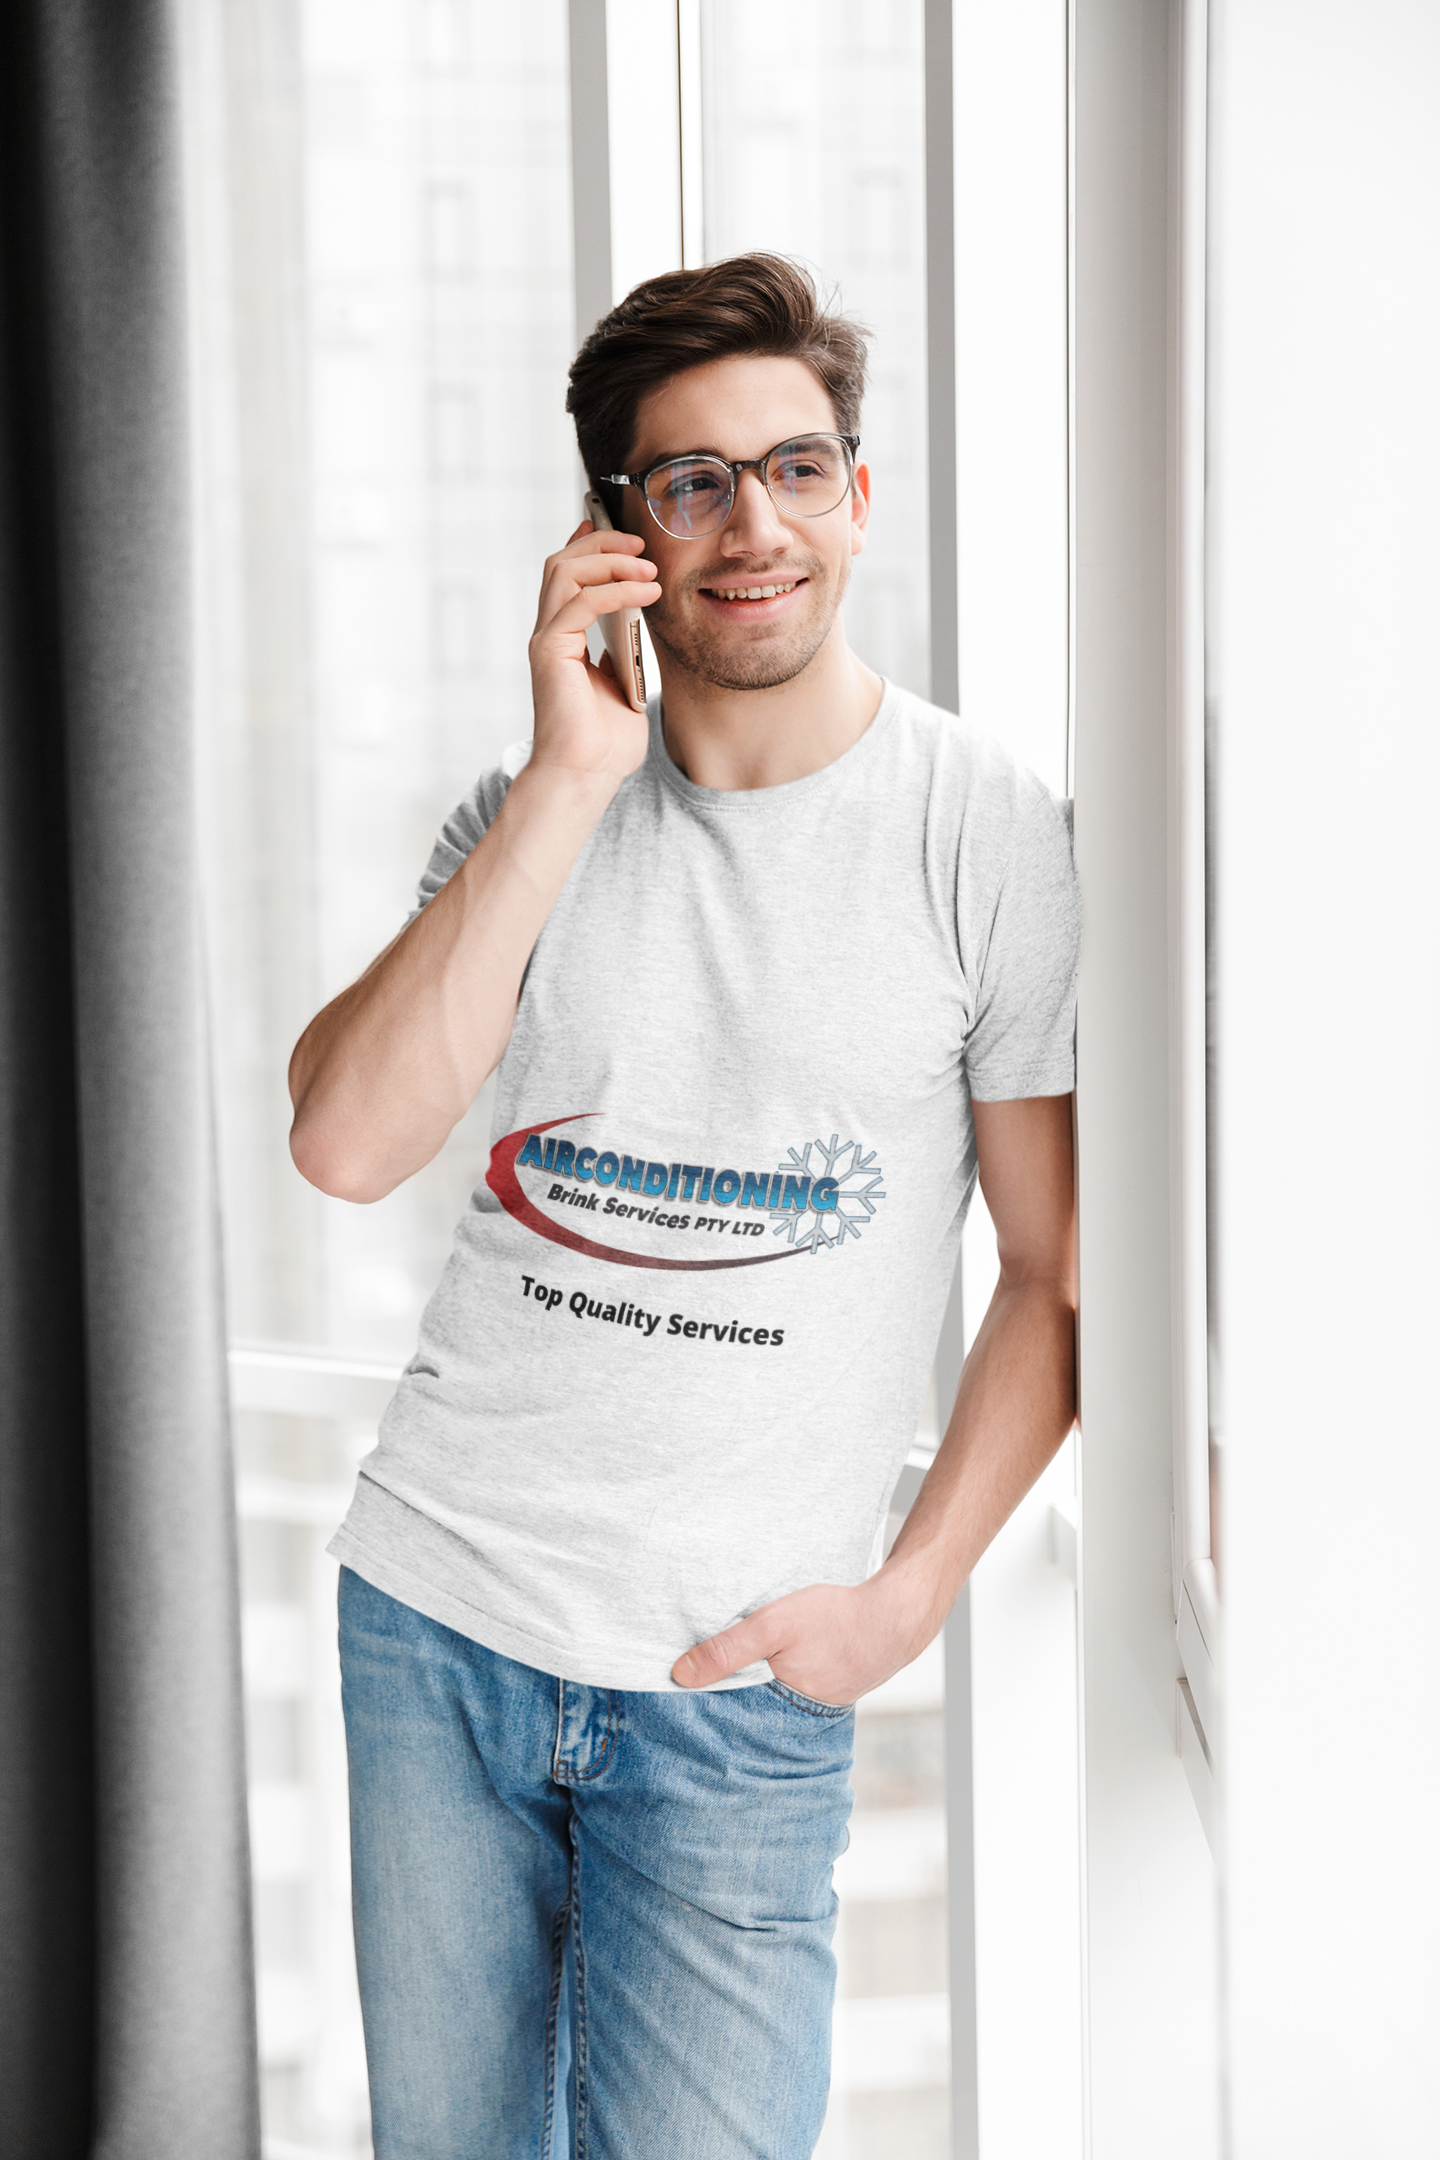 t-shirt-mockup-featuring-a-man-with-glasses-on-the-phone-40107-r-el2